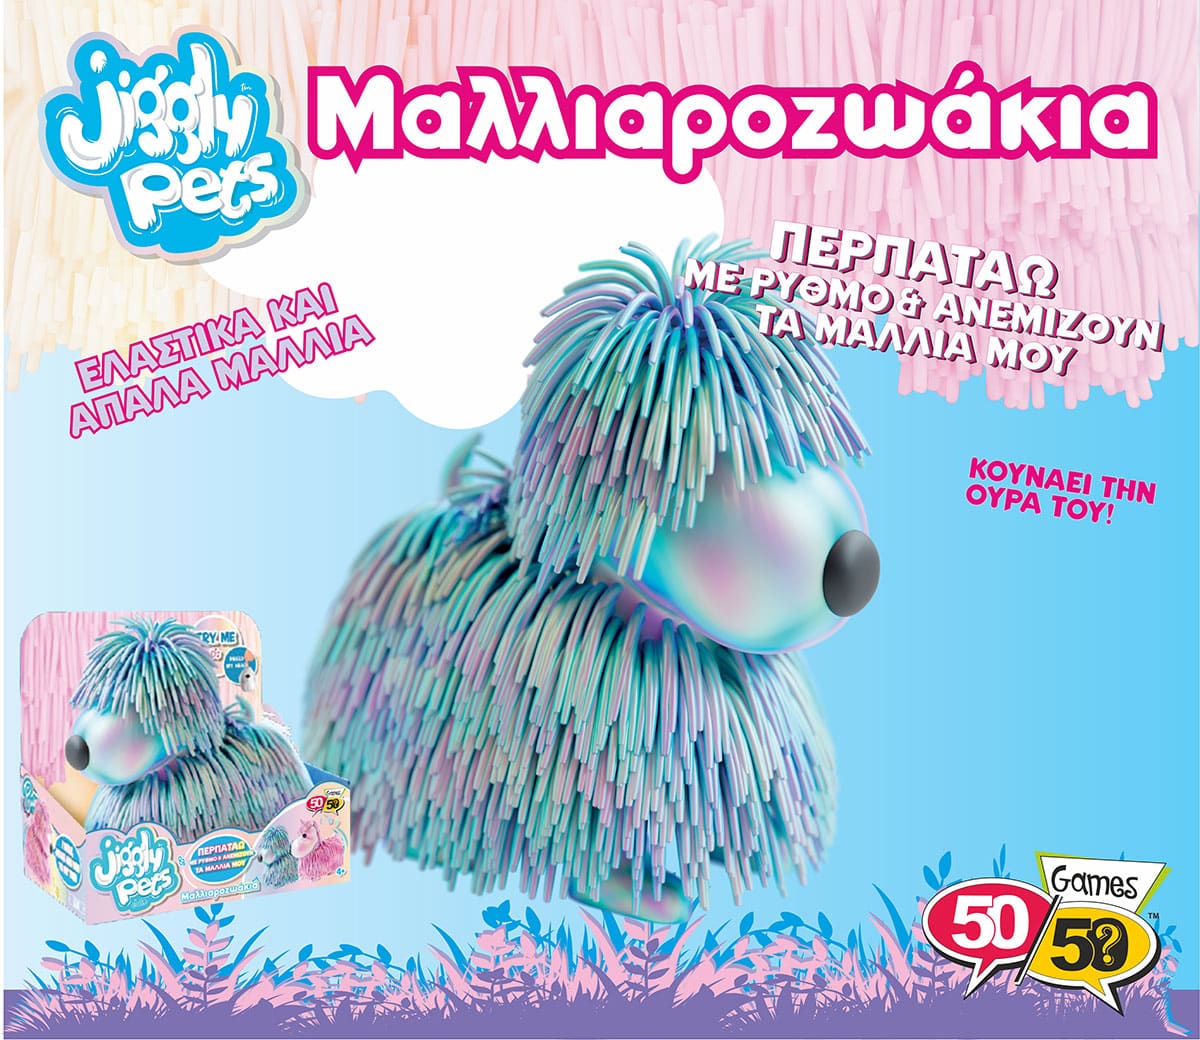 Jiggly Pets Μαλλιαροζωακια Puppy Κουταβι